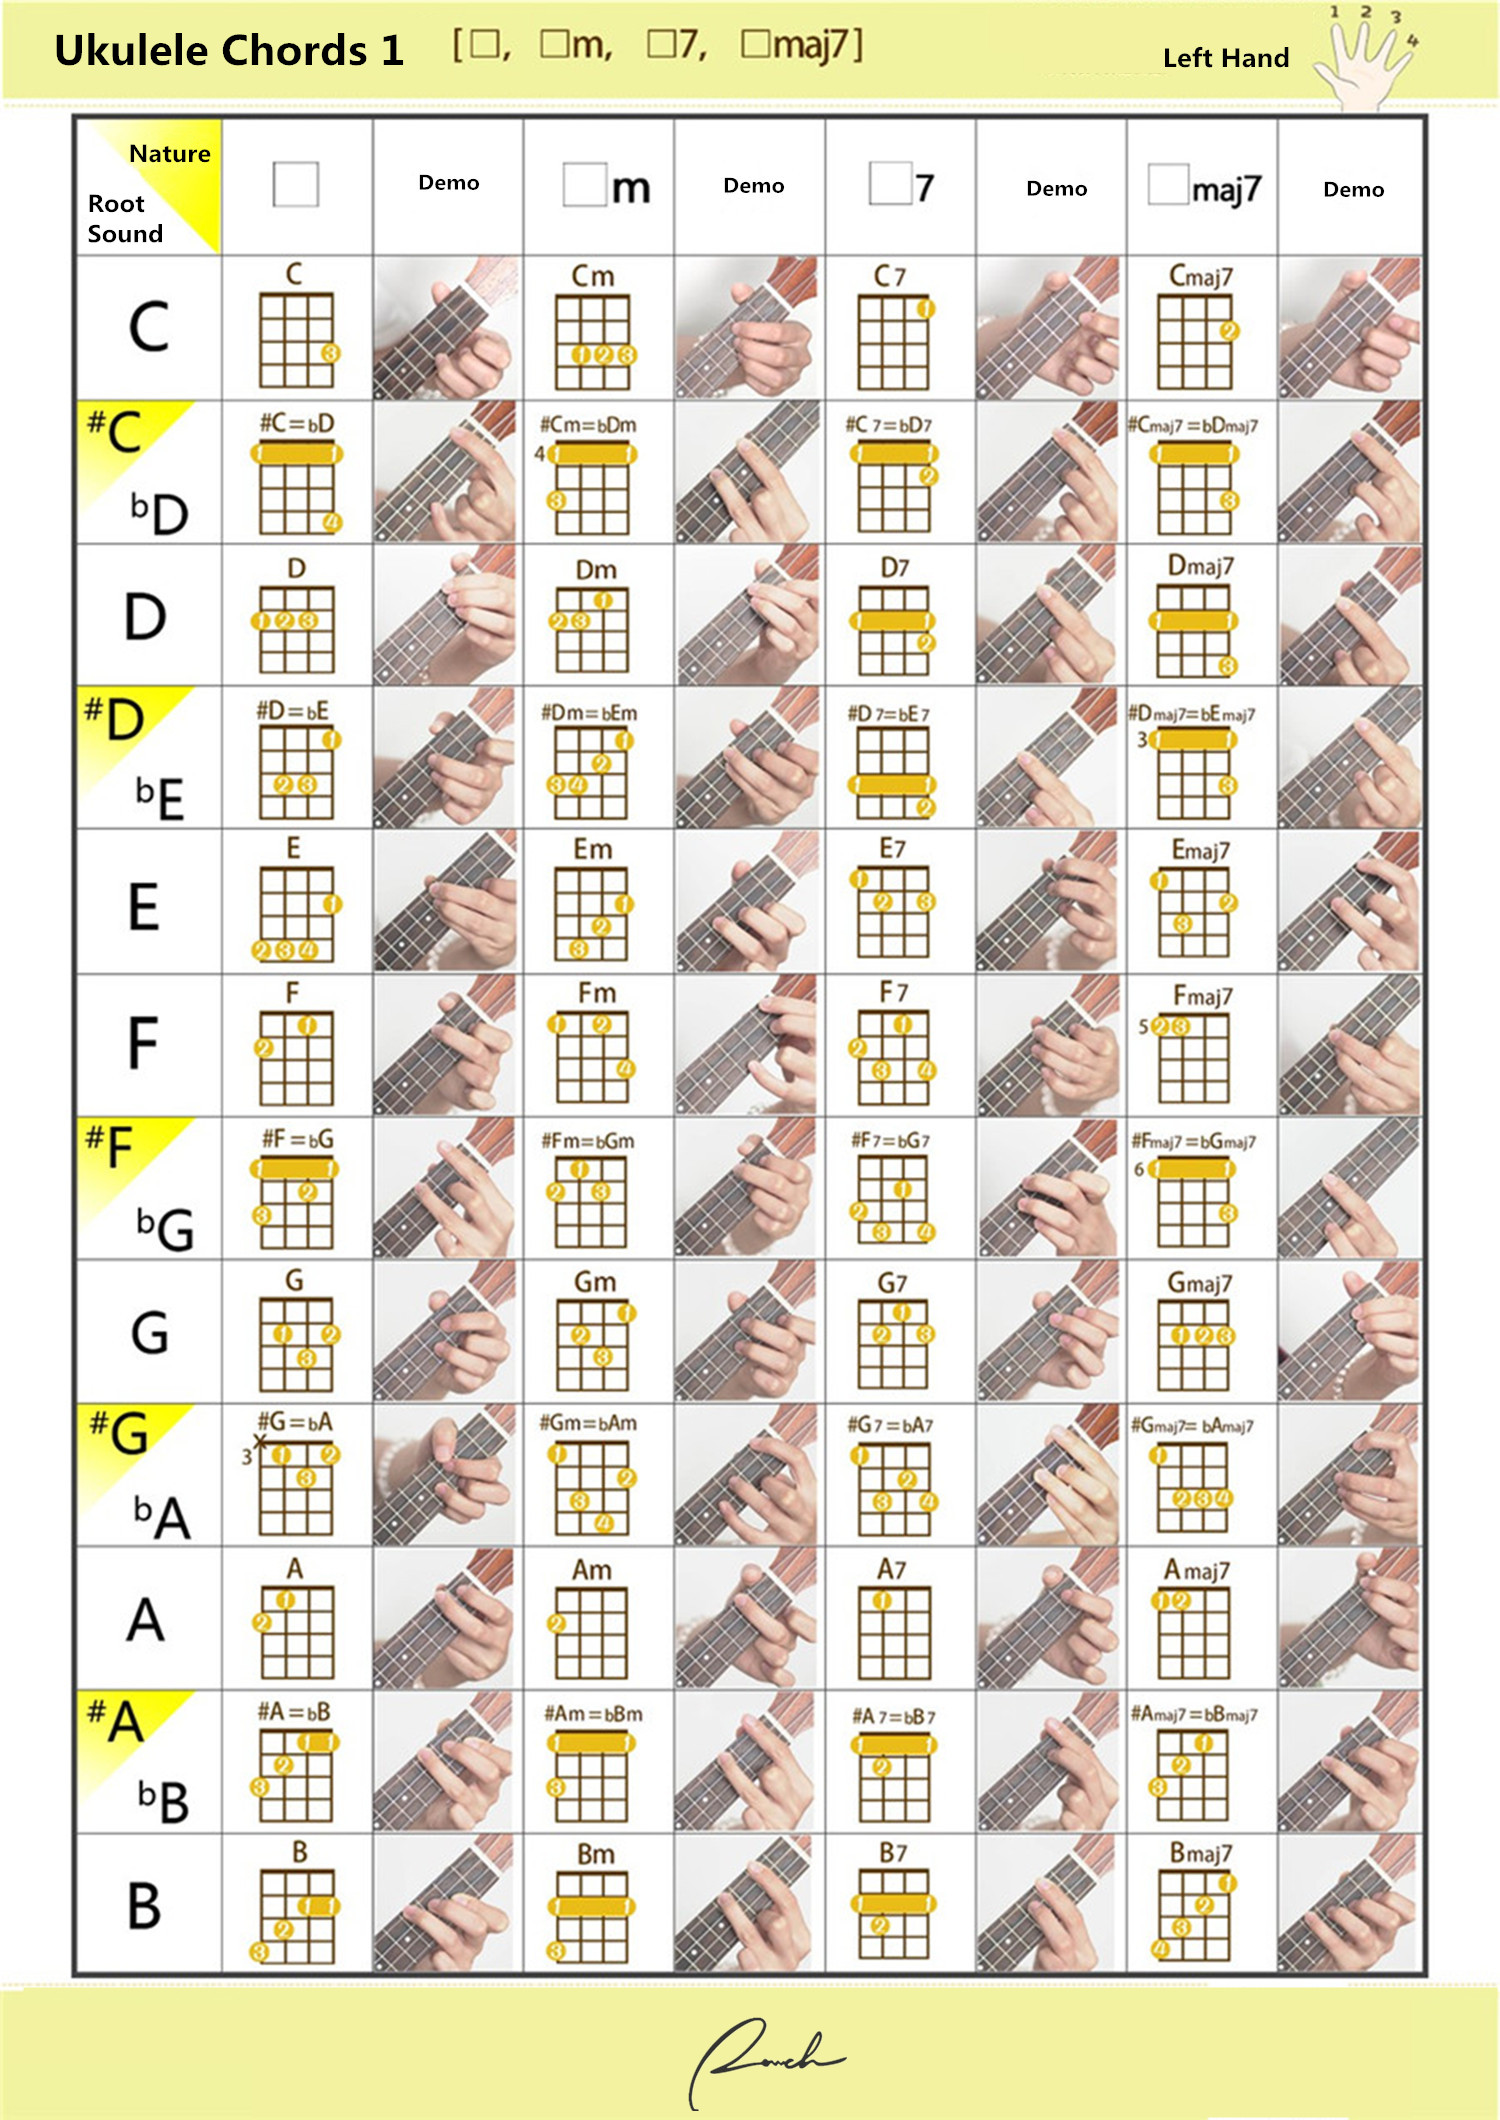 Ukulele All Chords Diagrams And Demo Ranch Ukulele Learn how to play somewhere over the rainbow on your ukulele quickly and easily with this detailed guide. chords diagrams and demo ranch ukulele